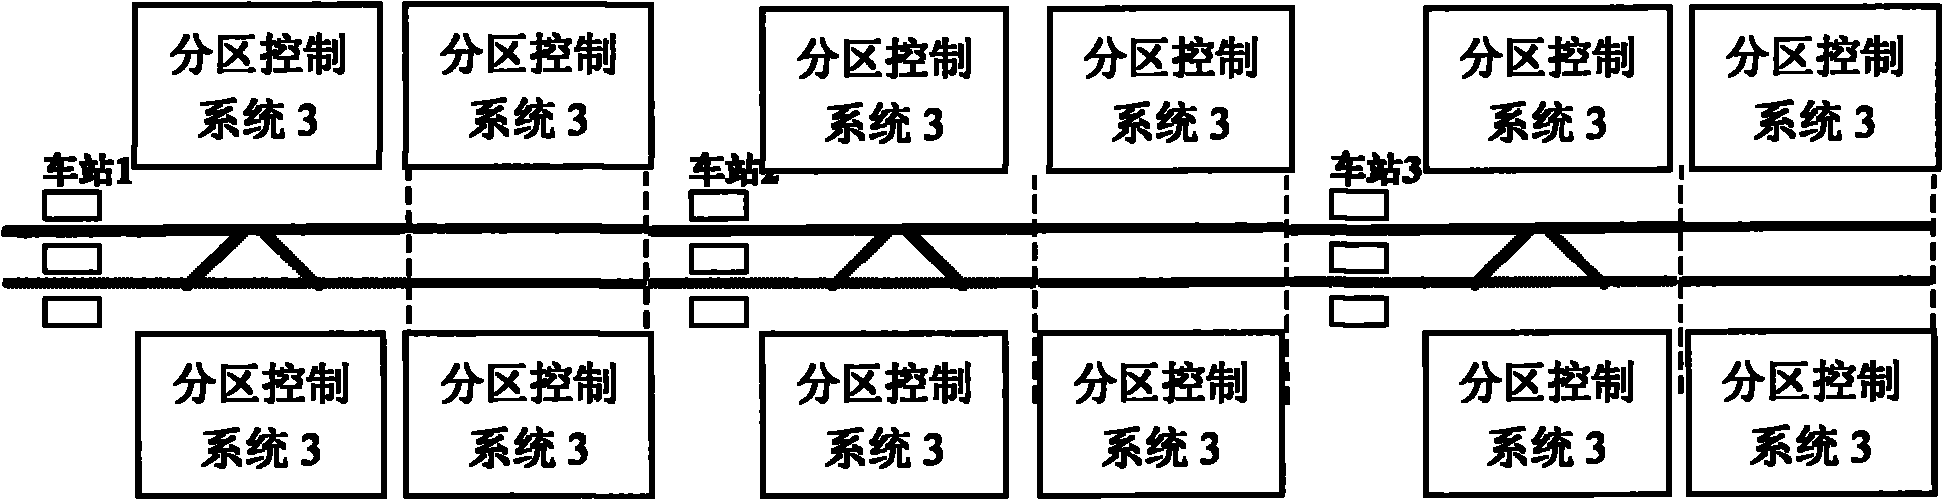 Traffic information network architecture system of self-controlling dispersion track